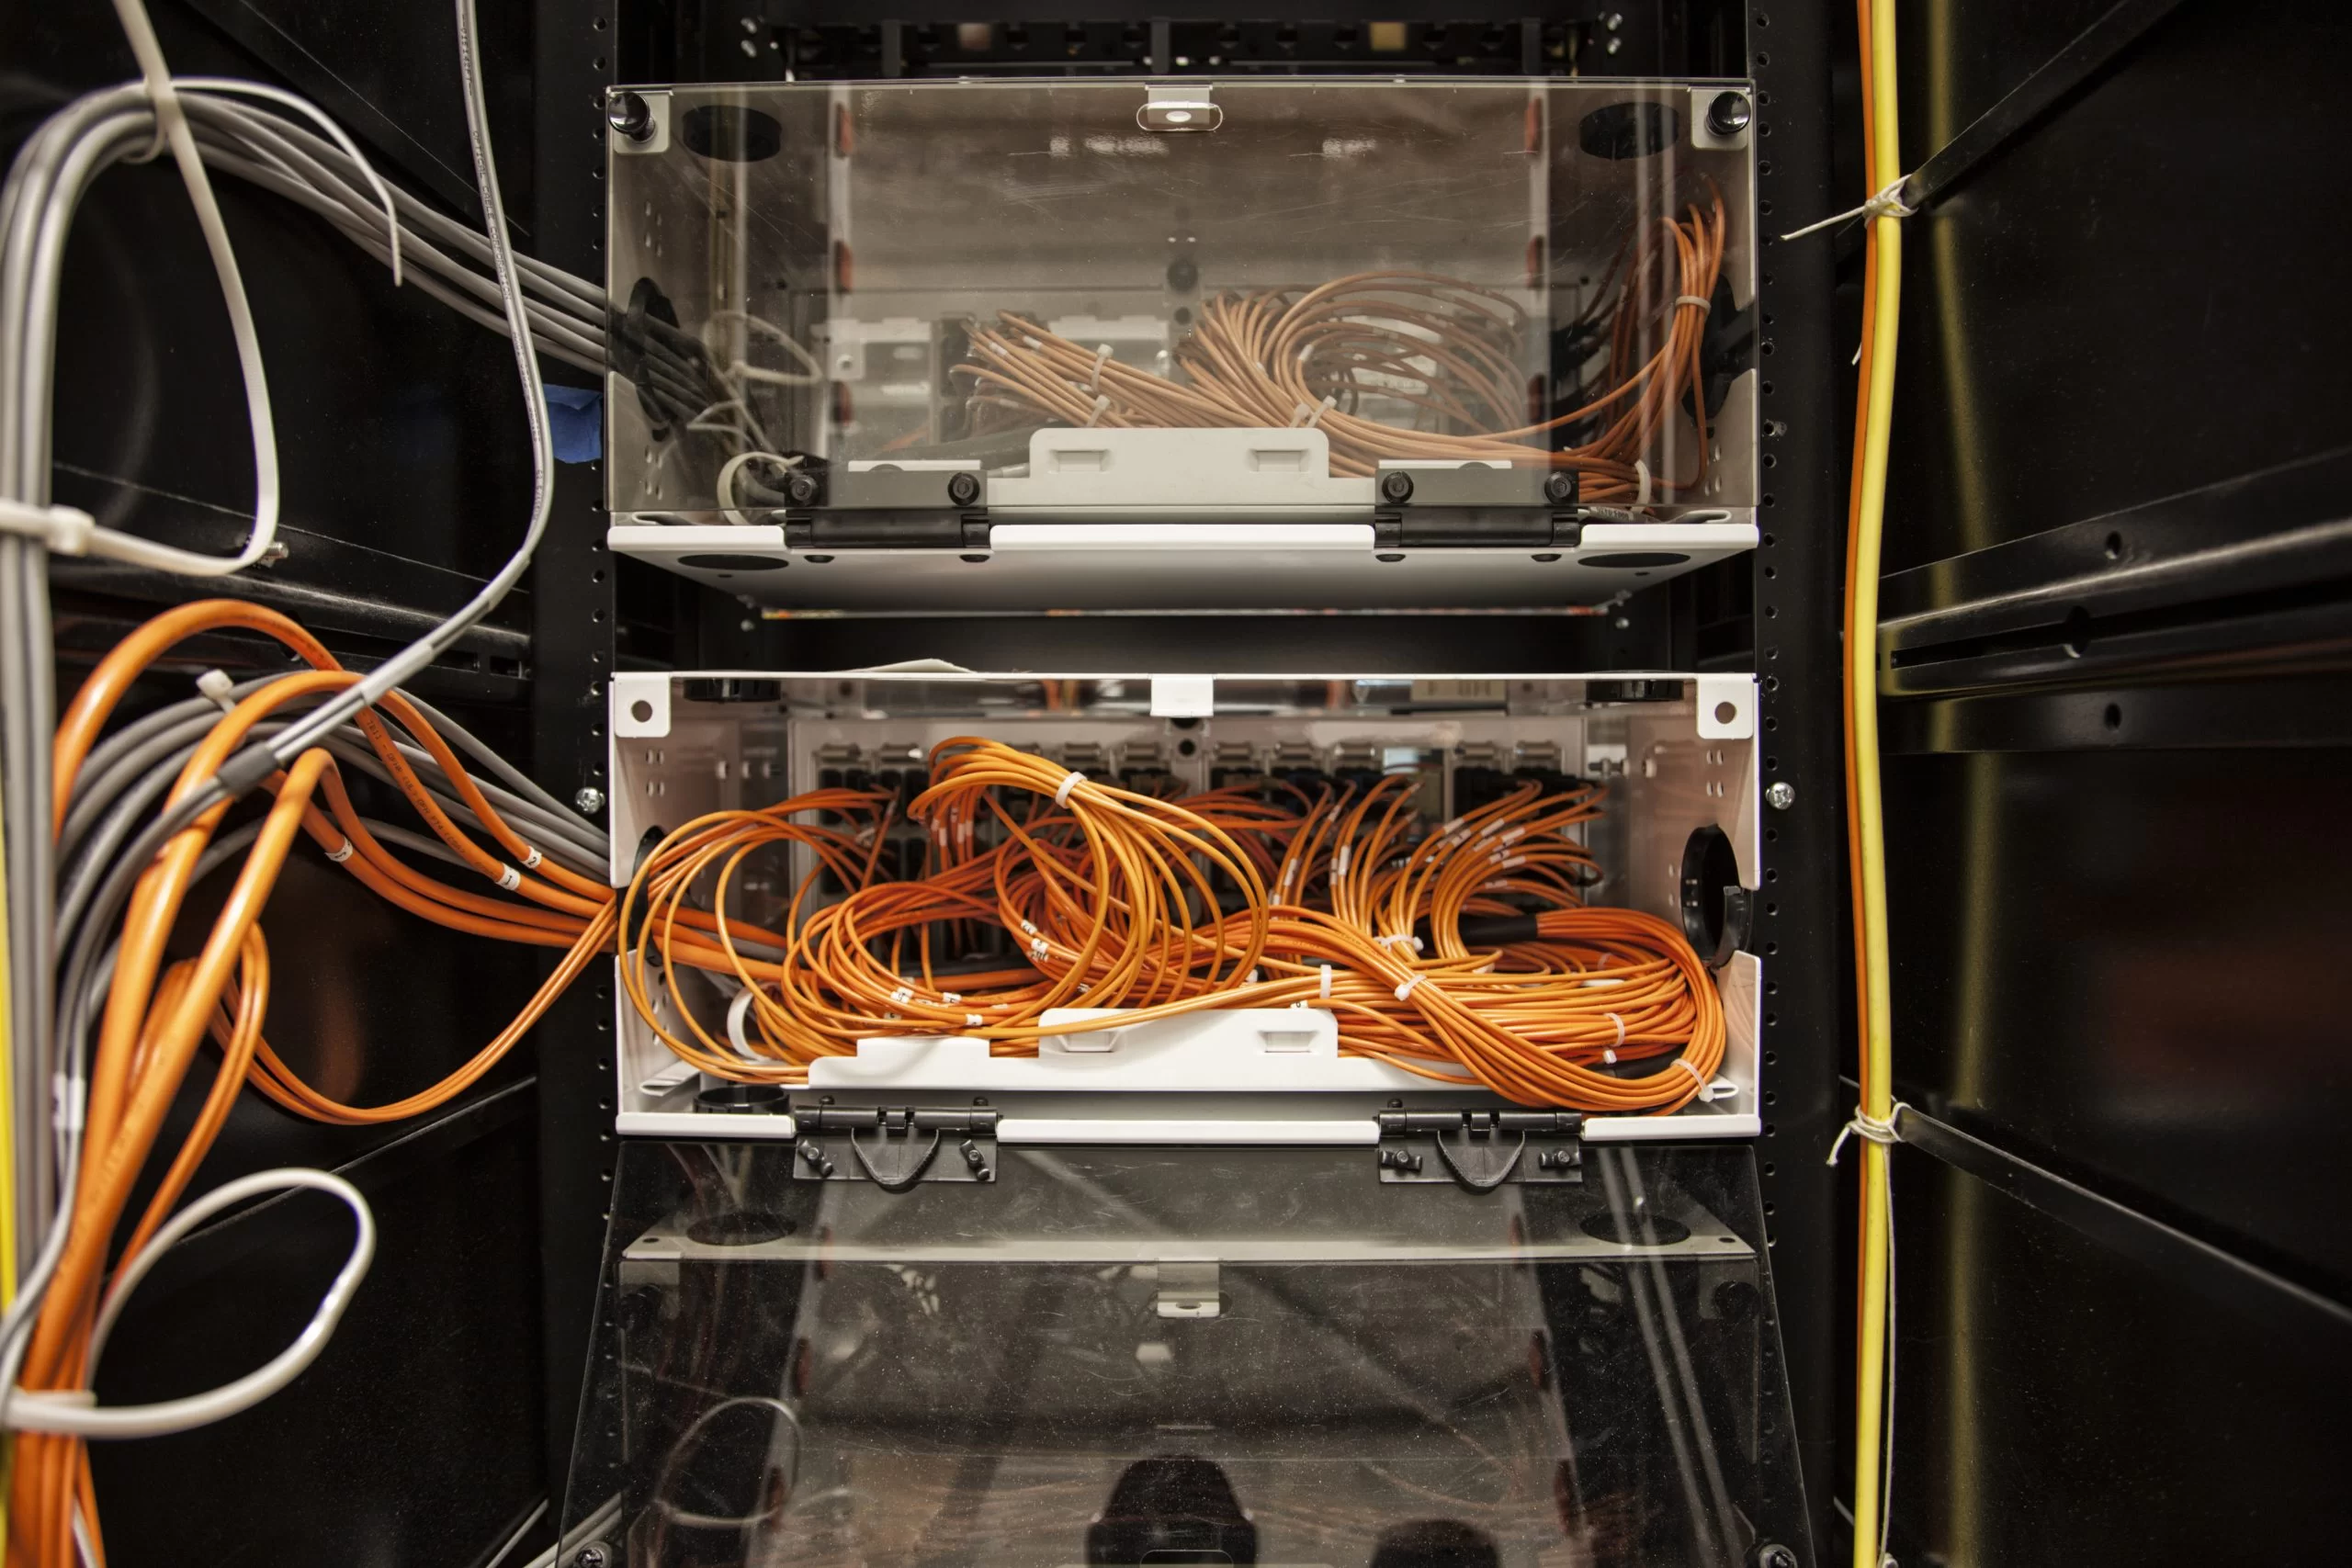 Closeup of cat 5 cable bundle system in a computer j9l4hgv scaled. Jpg